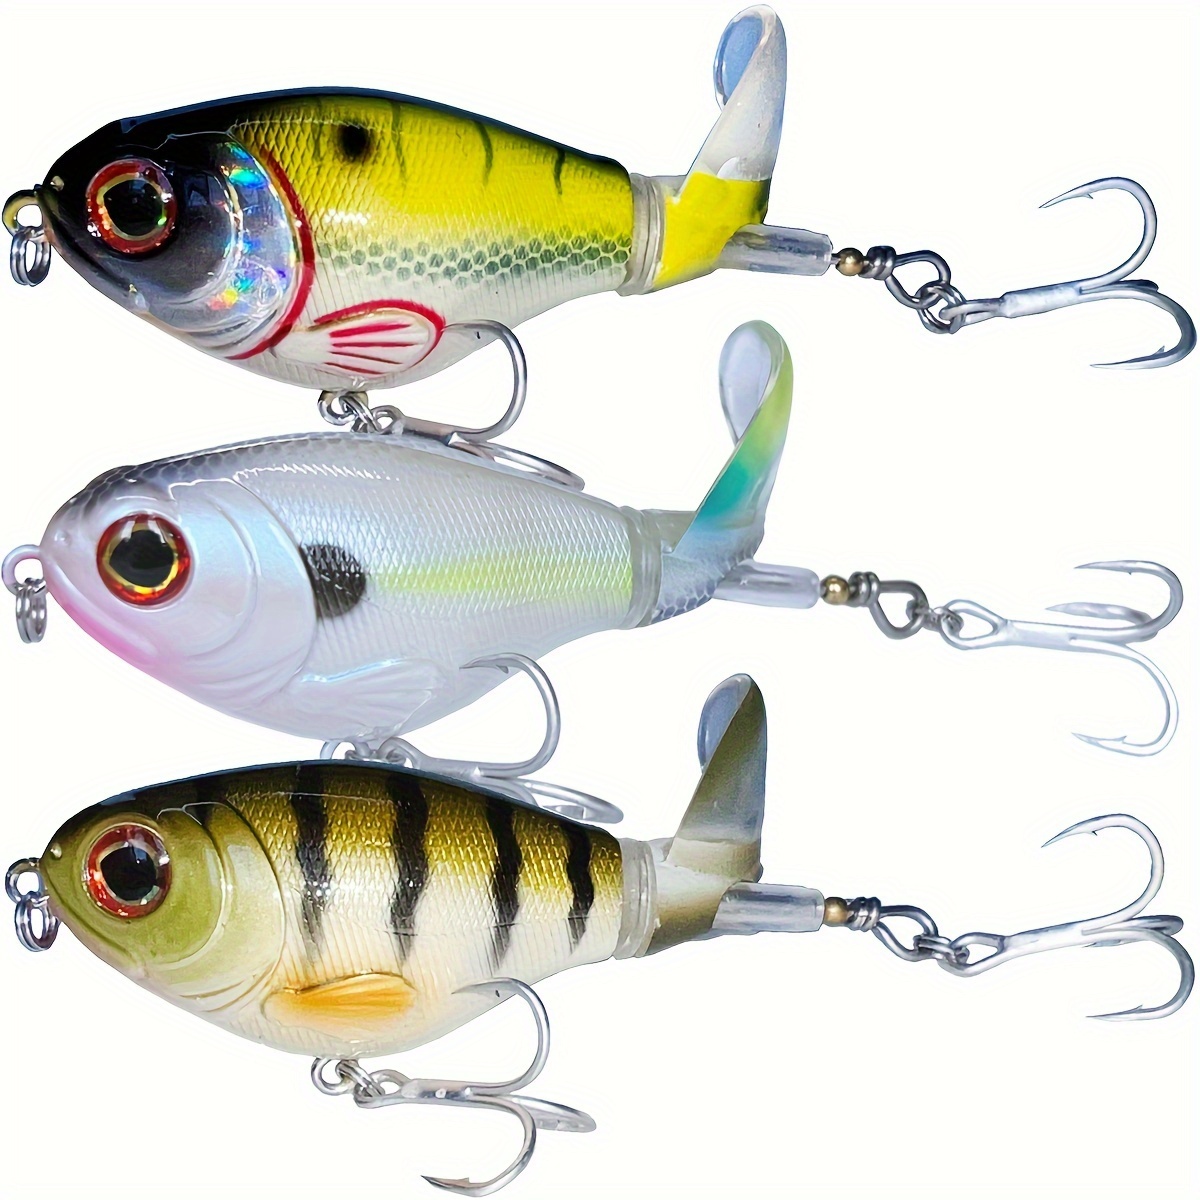 Joyeee 5 Pcs Whopper Plopper Fishing Lure for Bass, Trout, Walleye,  Predator Fish for Freshwater & Saltwater, Lifelike 3D Eyes Fishing Baits  Attractants, Fishing Gear and Equipment, 5 Sizes Colors #22, Lure